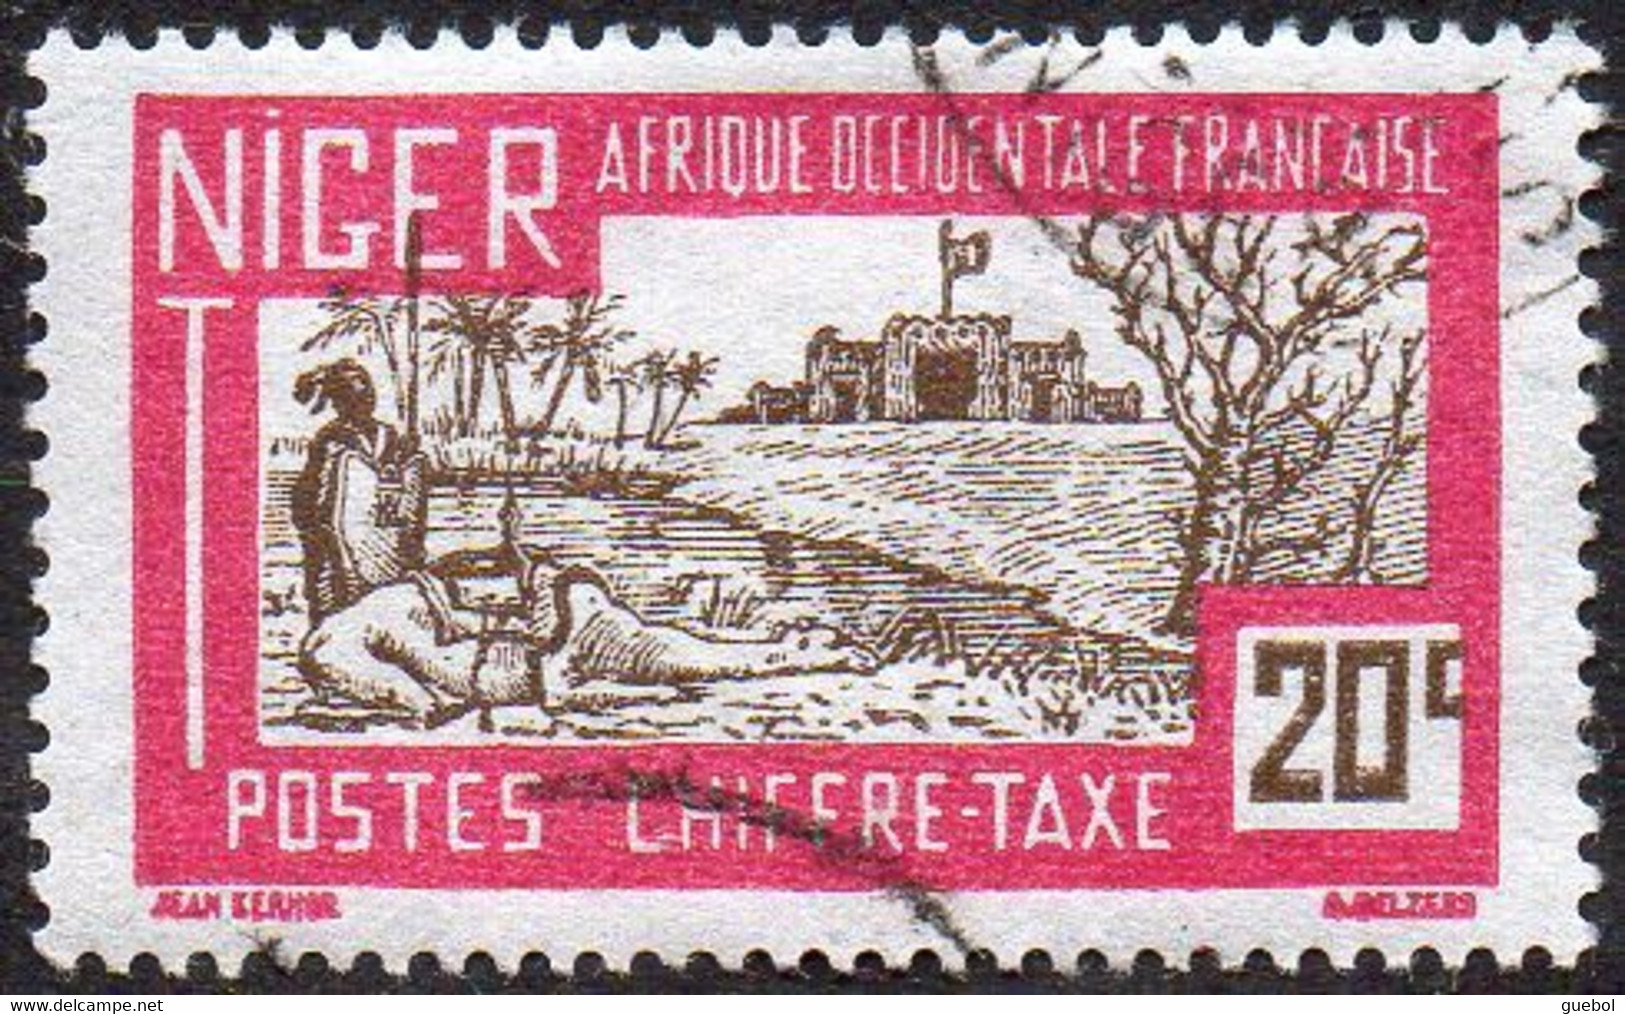 Niger Obl. N° Taxe 14 - Chameau Baraqué - Used Stamps